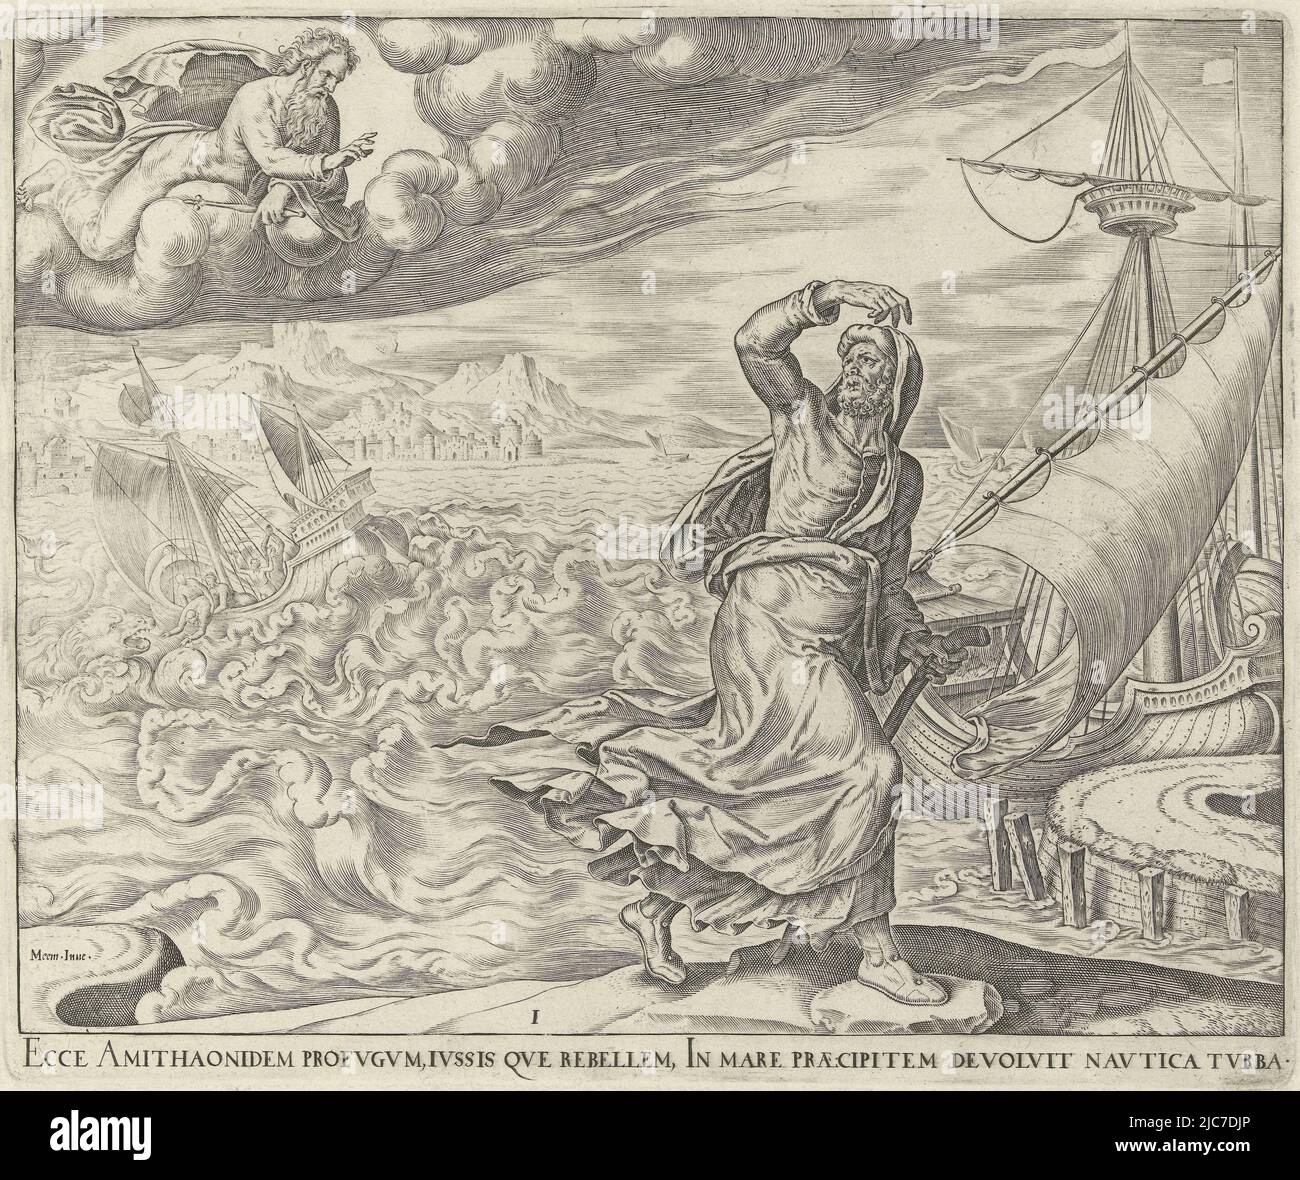 Jonah stands on the shoreline looking at God who is on a cloud and talking to him. At the quay wall is the ship in which Jonah flees. On the water, Jonah can be seen being thrown overboard later, God commands Jonah to go to Nineveh History of Jonah , print maker: Philips Galle, Maarten van Heemskerck, (mentioned on object), publisher: Theodoor Galle, print maker: Haarlem, publisher: Antwerp, 1596 - 1633, paper, engraving, h 207 mm × w 248 mm Stock Photo